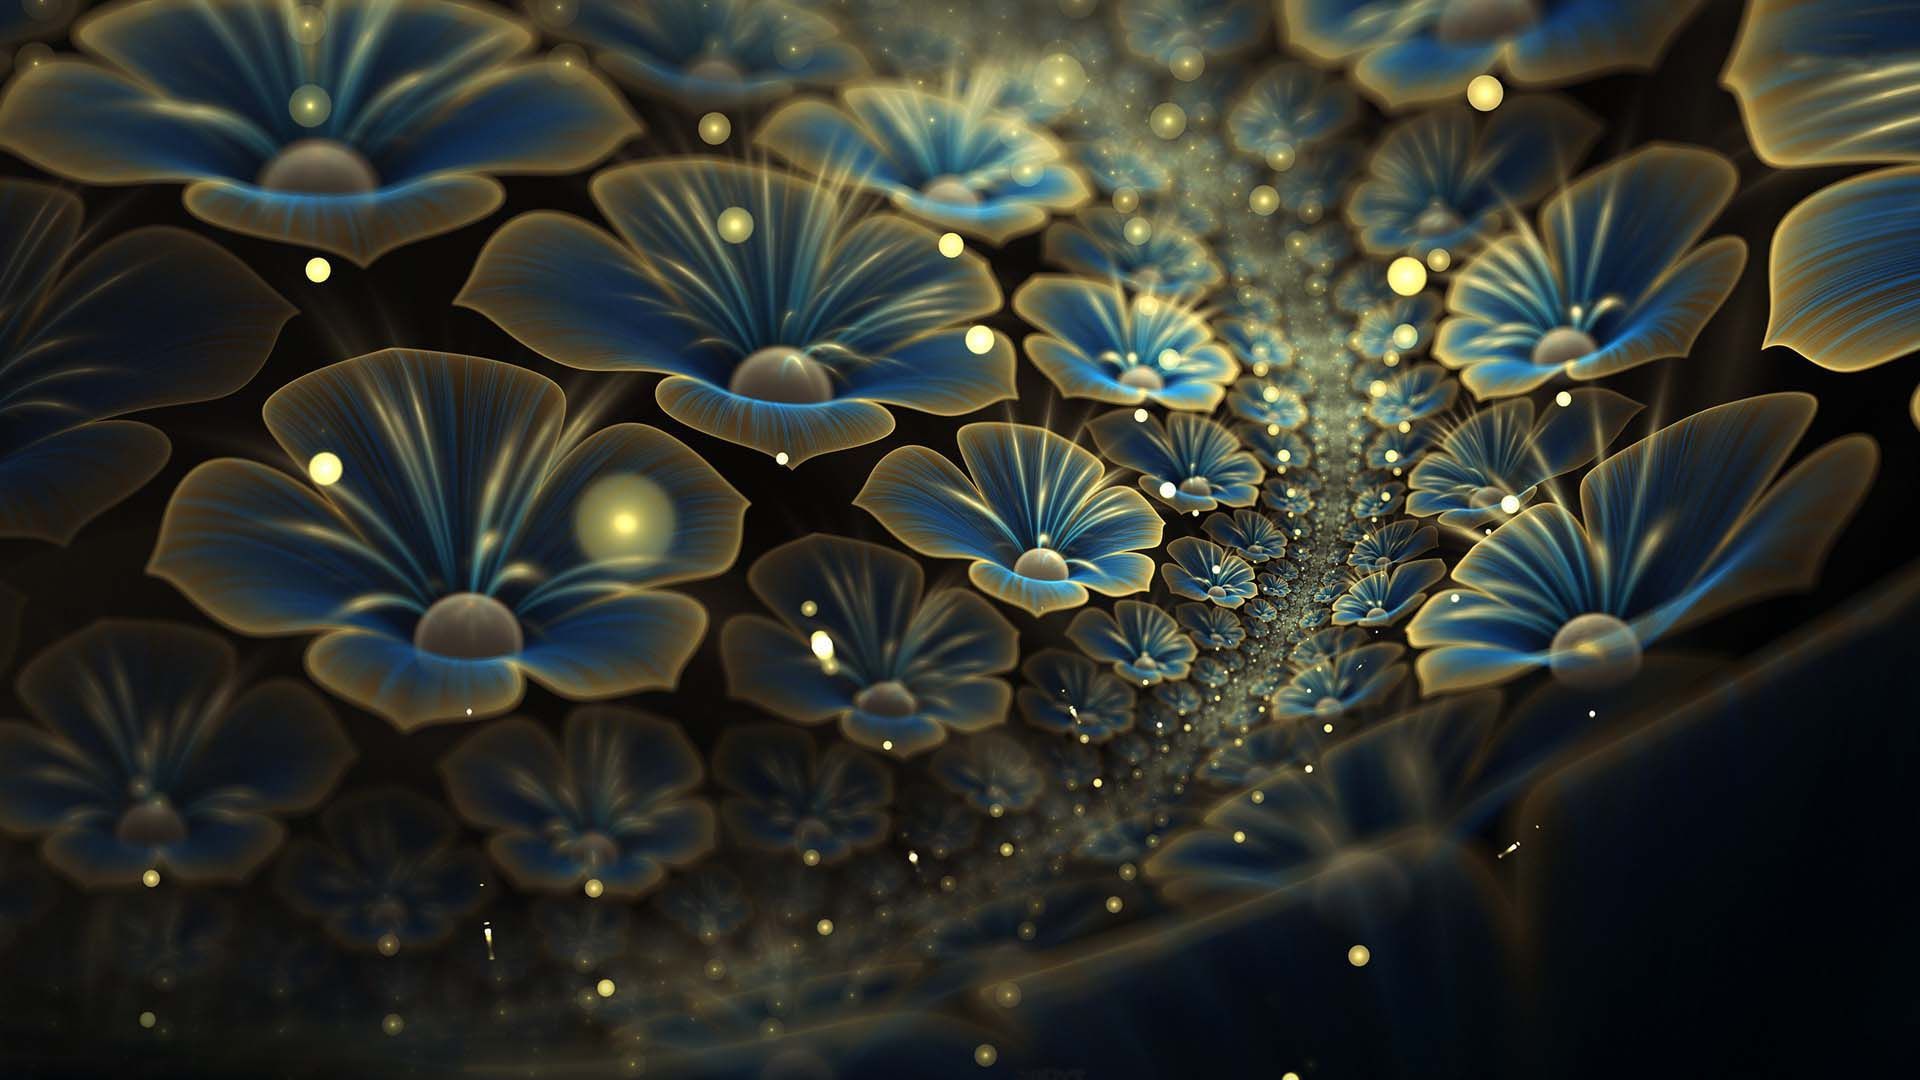 1920x1080 Amazing Glowing Flowers Hd 3d And Abstract Wallpaper For Mobile